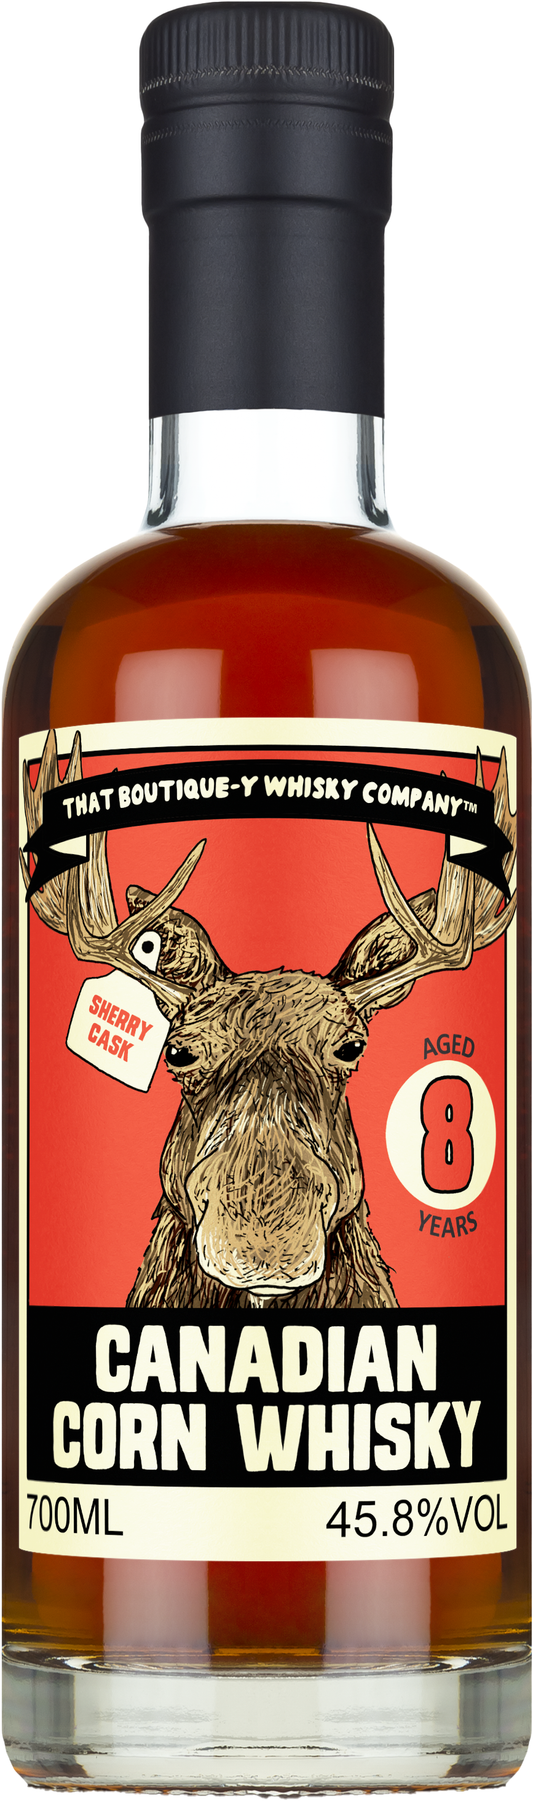 That Boutique-Y Whisky Company 8 Year Old Canadian Corn Whisky 700ml